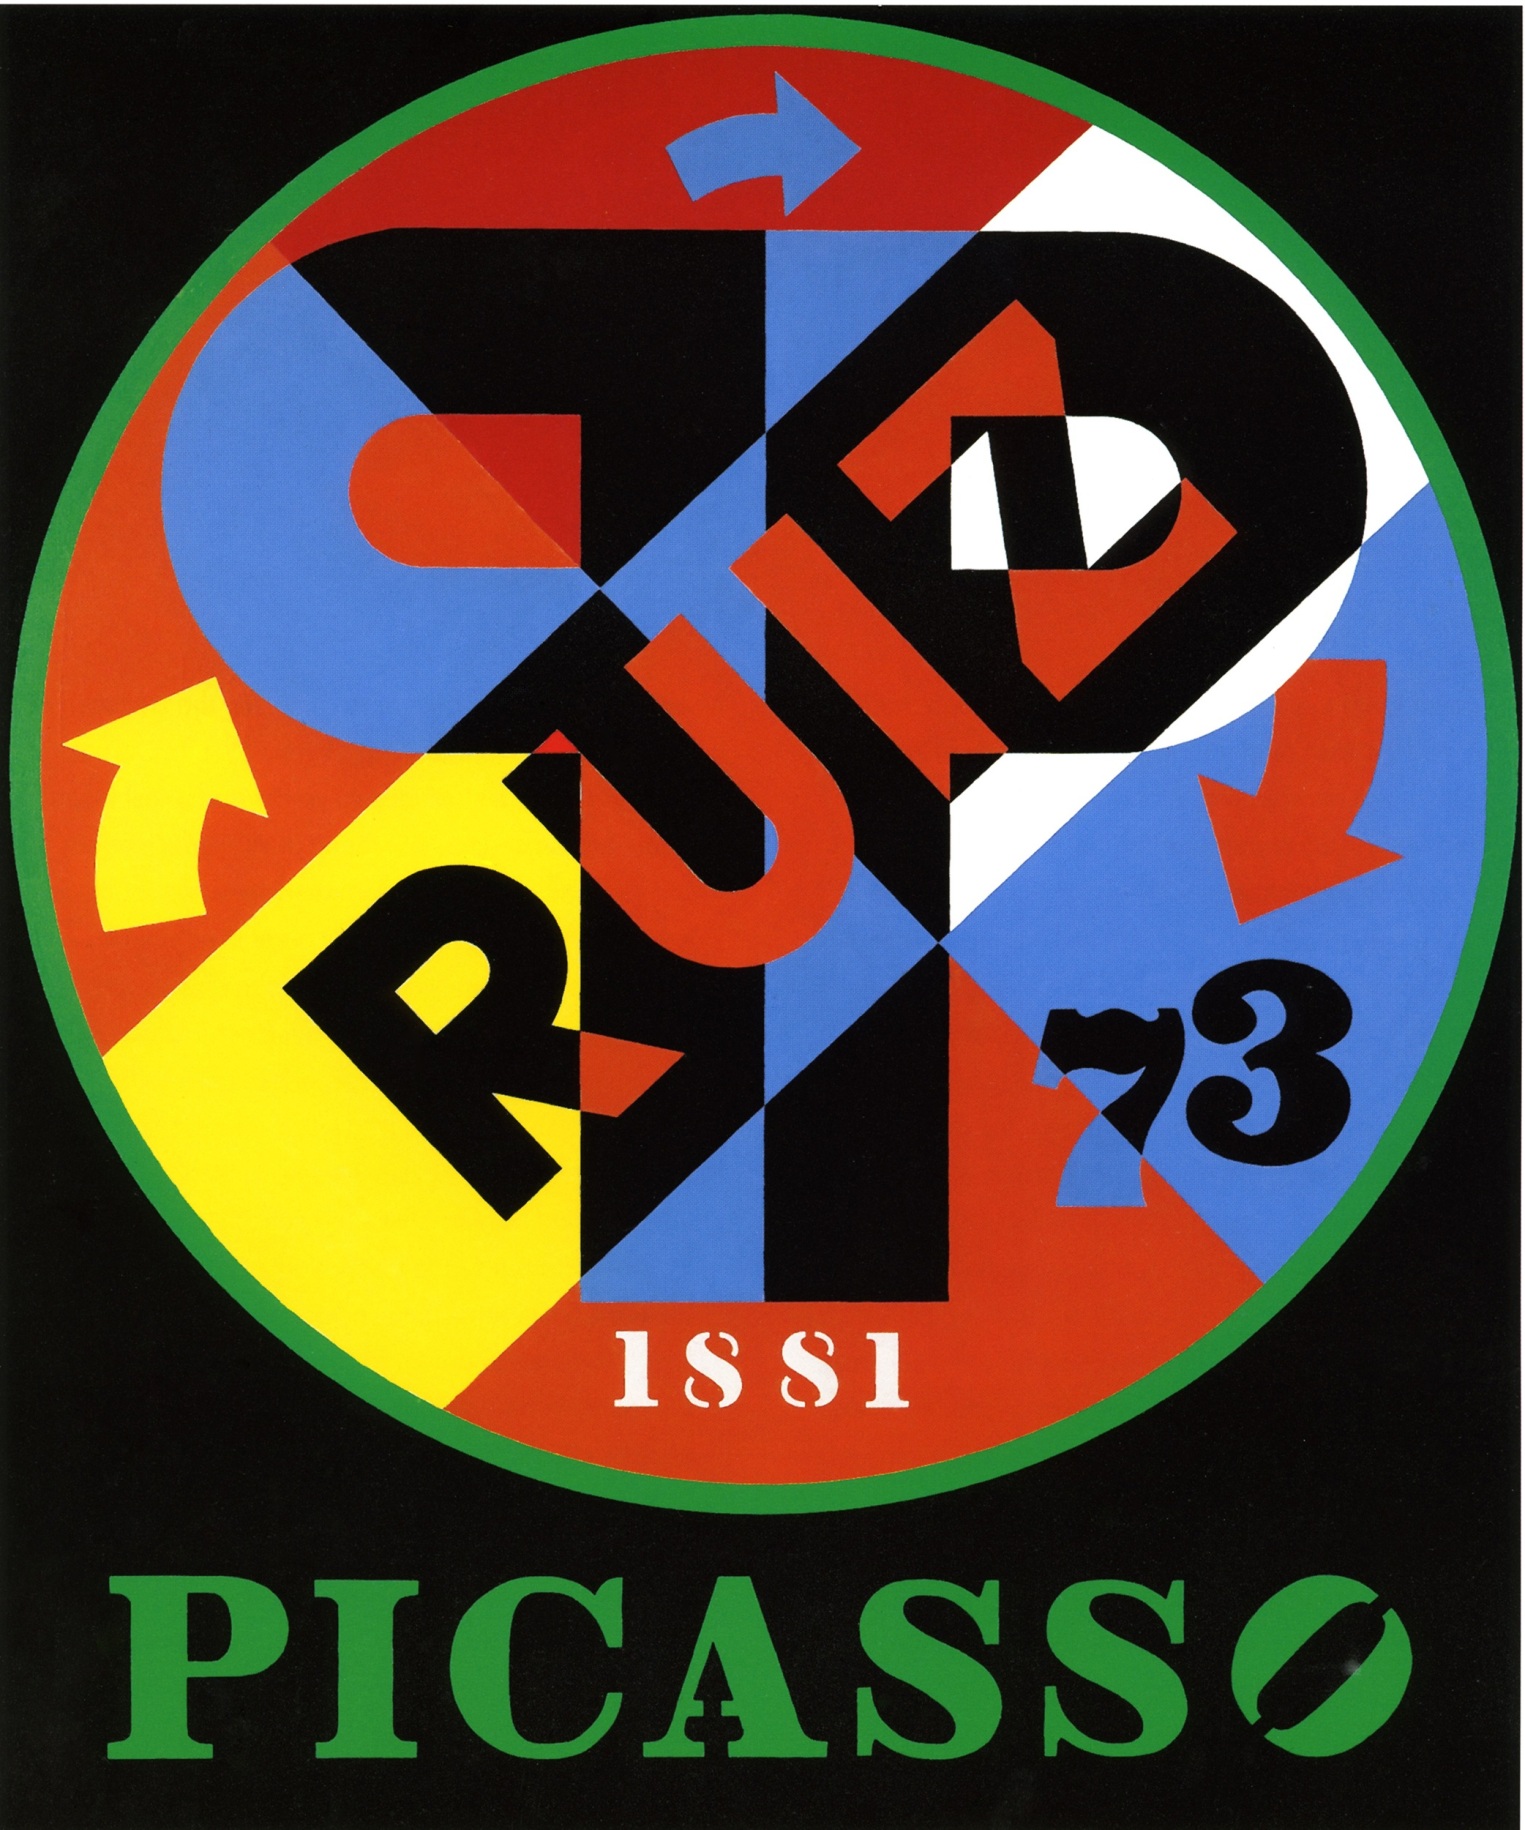 Picasso II, a 60 by 50 inch painting with a black ground and the word Picasso painted in green letters across the bottom of the canvas. Above, and occupying most of the canvas, is a circle with a green outline. Dominating the circle are two blue and black large letter &quot;P&quot;s, back to back. In a diagonal band across the circle and over the Ps is the name &quot;Ruiz,&quot;painted in black and red letters. The date 1881 is painted in white numbers at the bottom of the circle, and to the right is the date 73 in blue and black numbers, with a red arrow above it. A yellow arrow appears in the middle left side of the circle, and a blue arrow at the top of the circle.